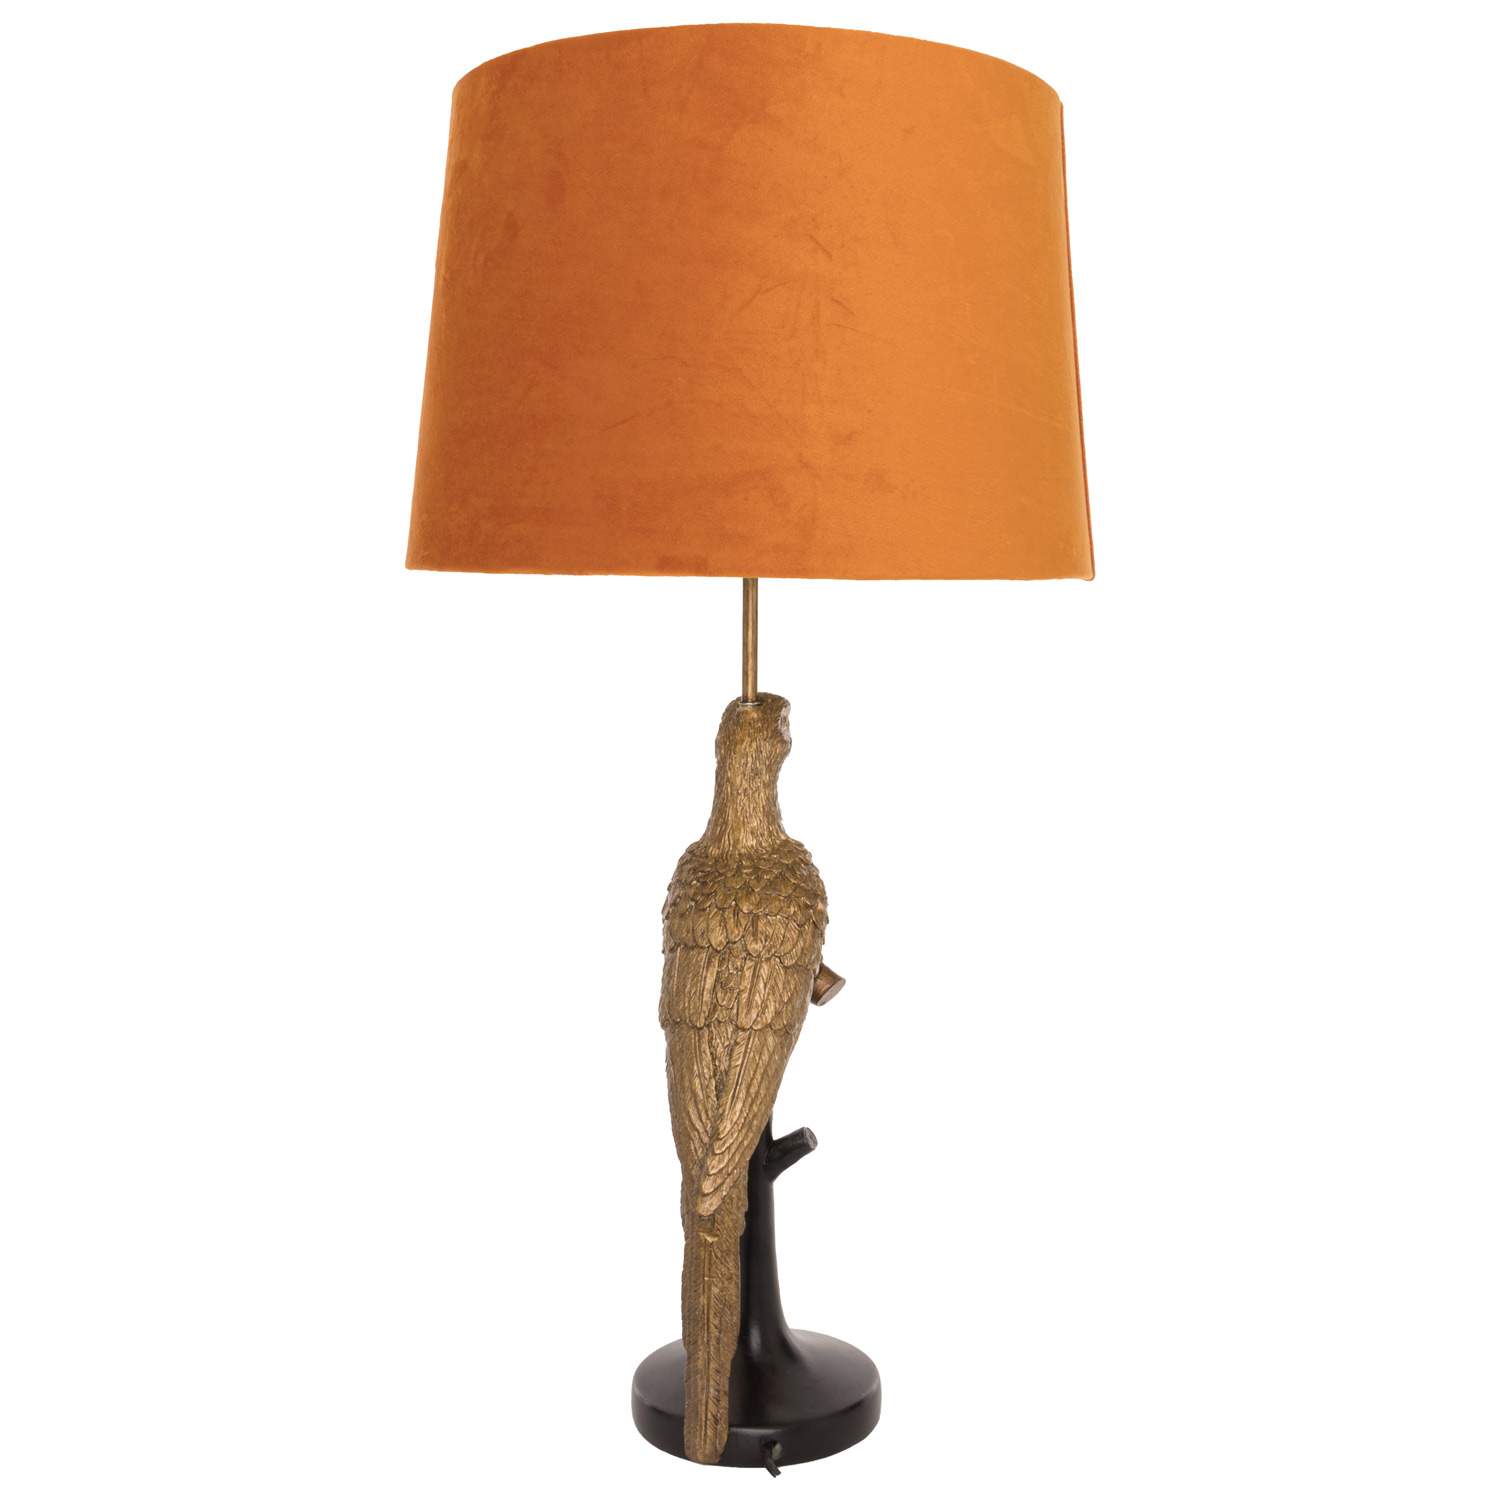 Percy The Parrot Gold And Black Lamp With Burnt Orange Shade - Image 3